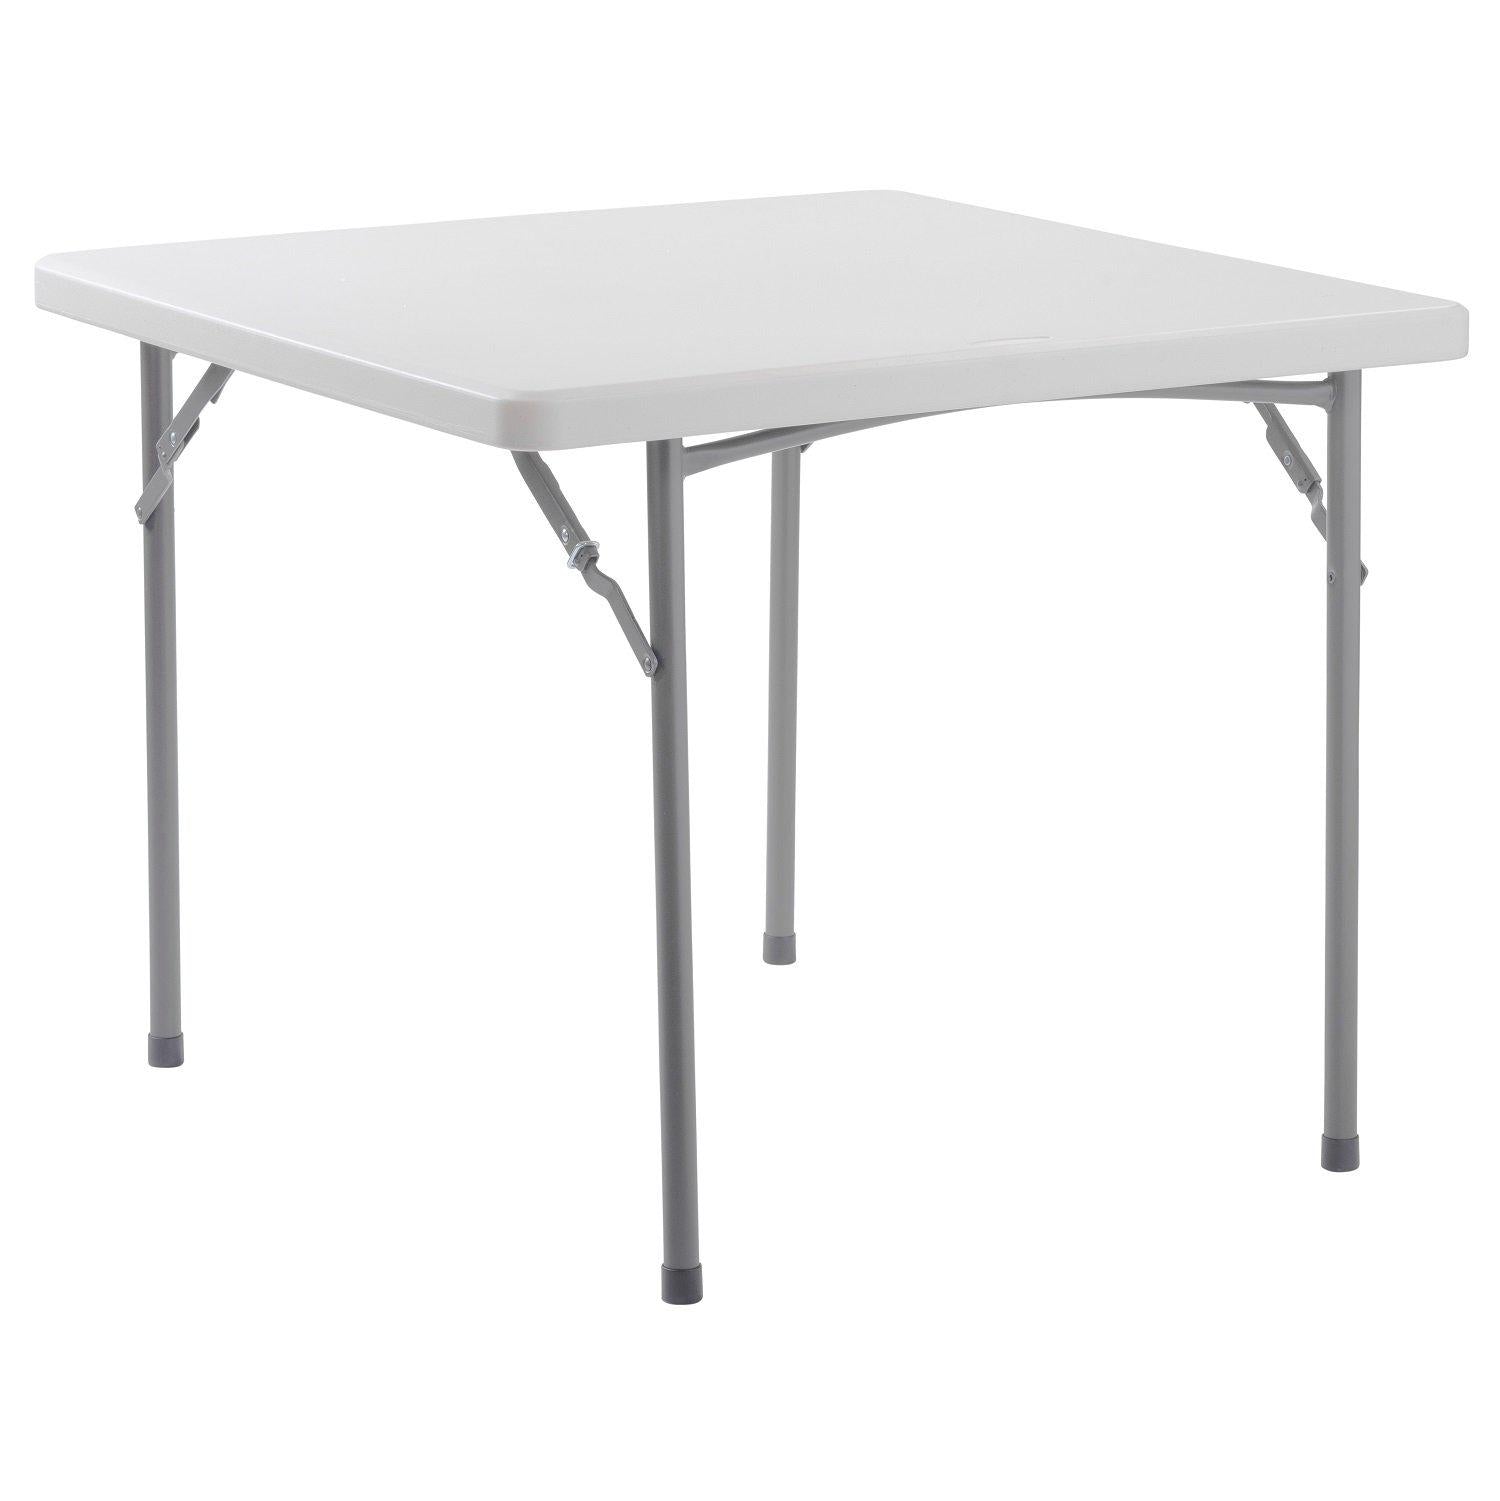 Heavy Duty "Smooth Top" Square Blow-Molded Plastic Folding Table, 36" x 36", Speckled Grey Top, Grey Frame